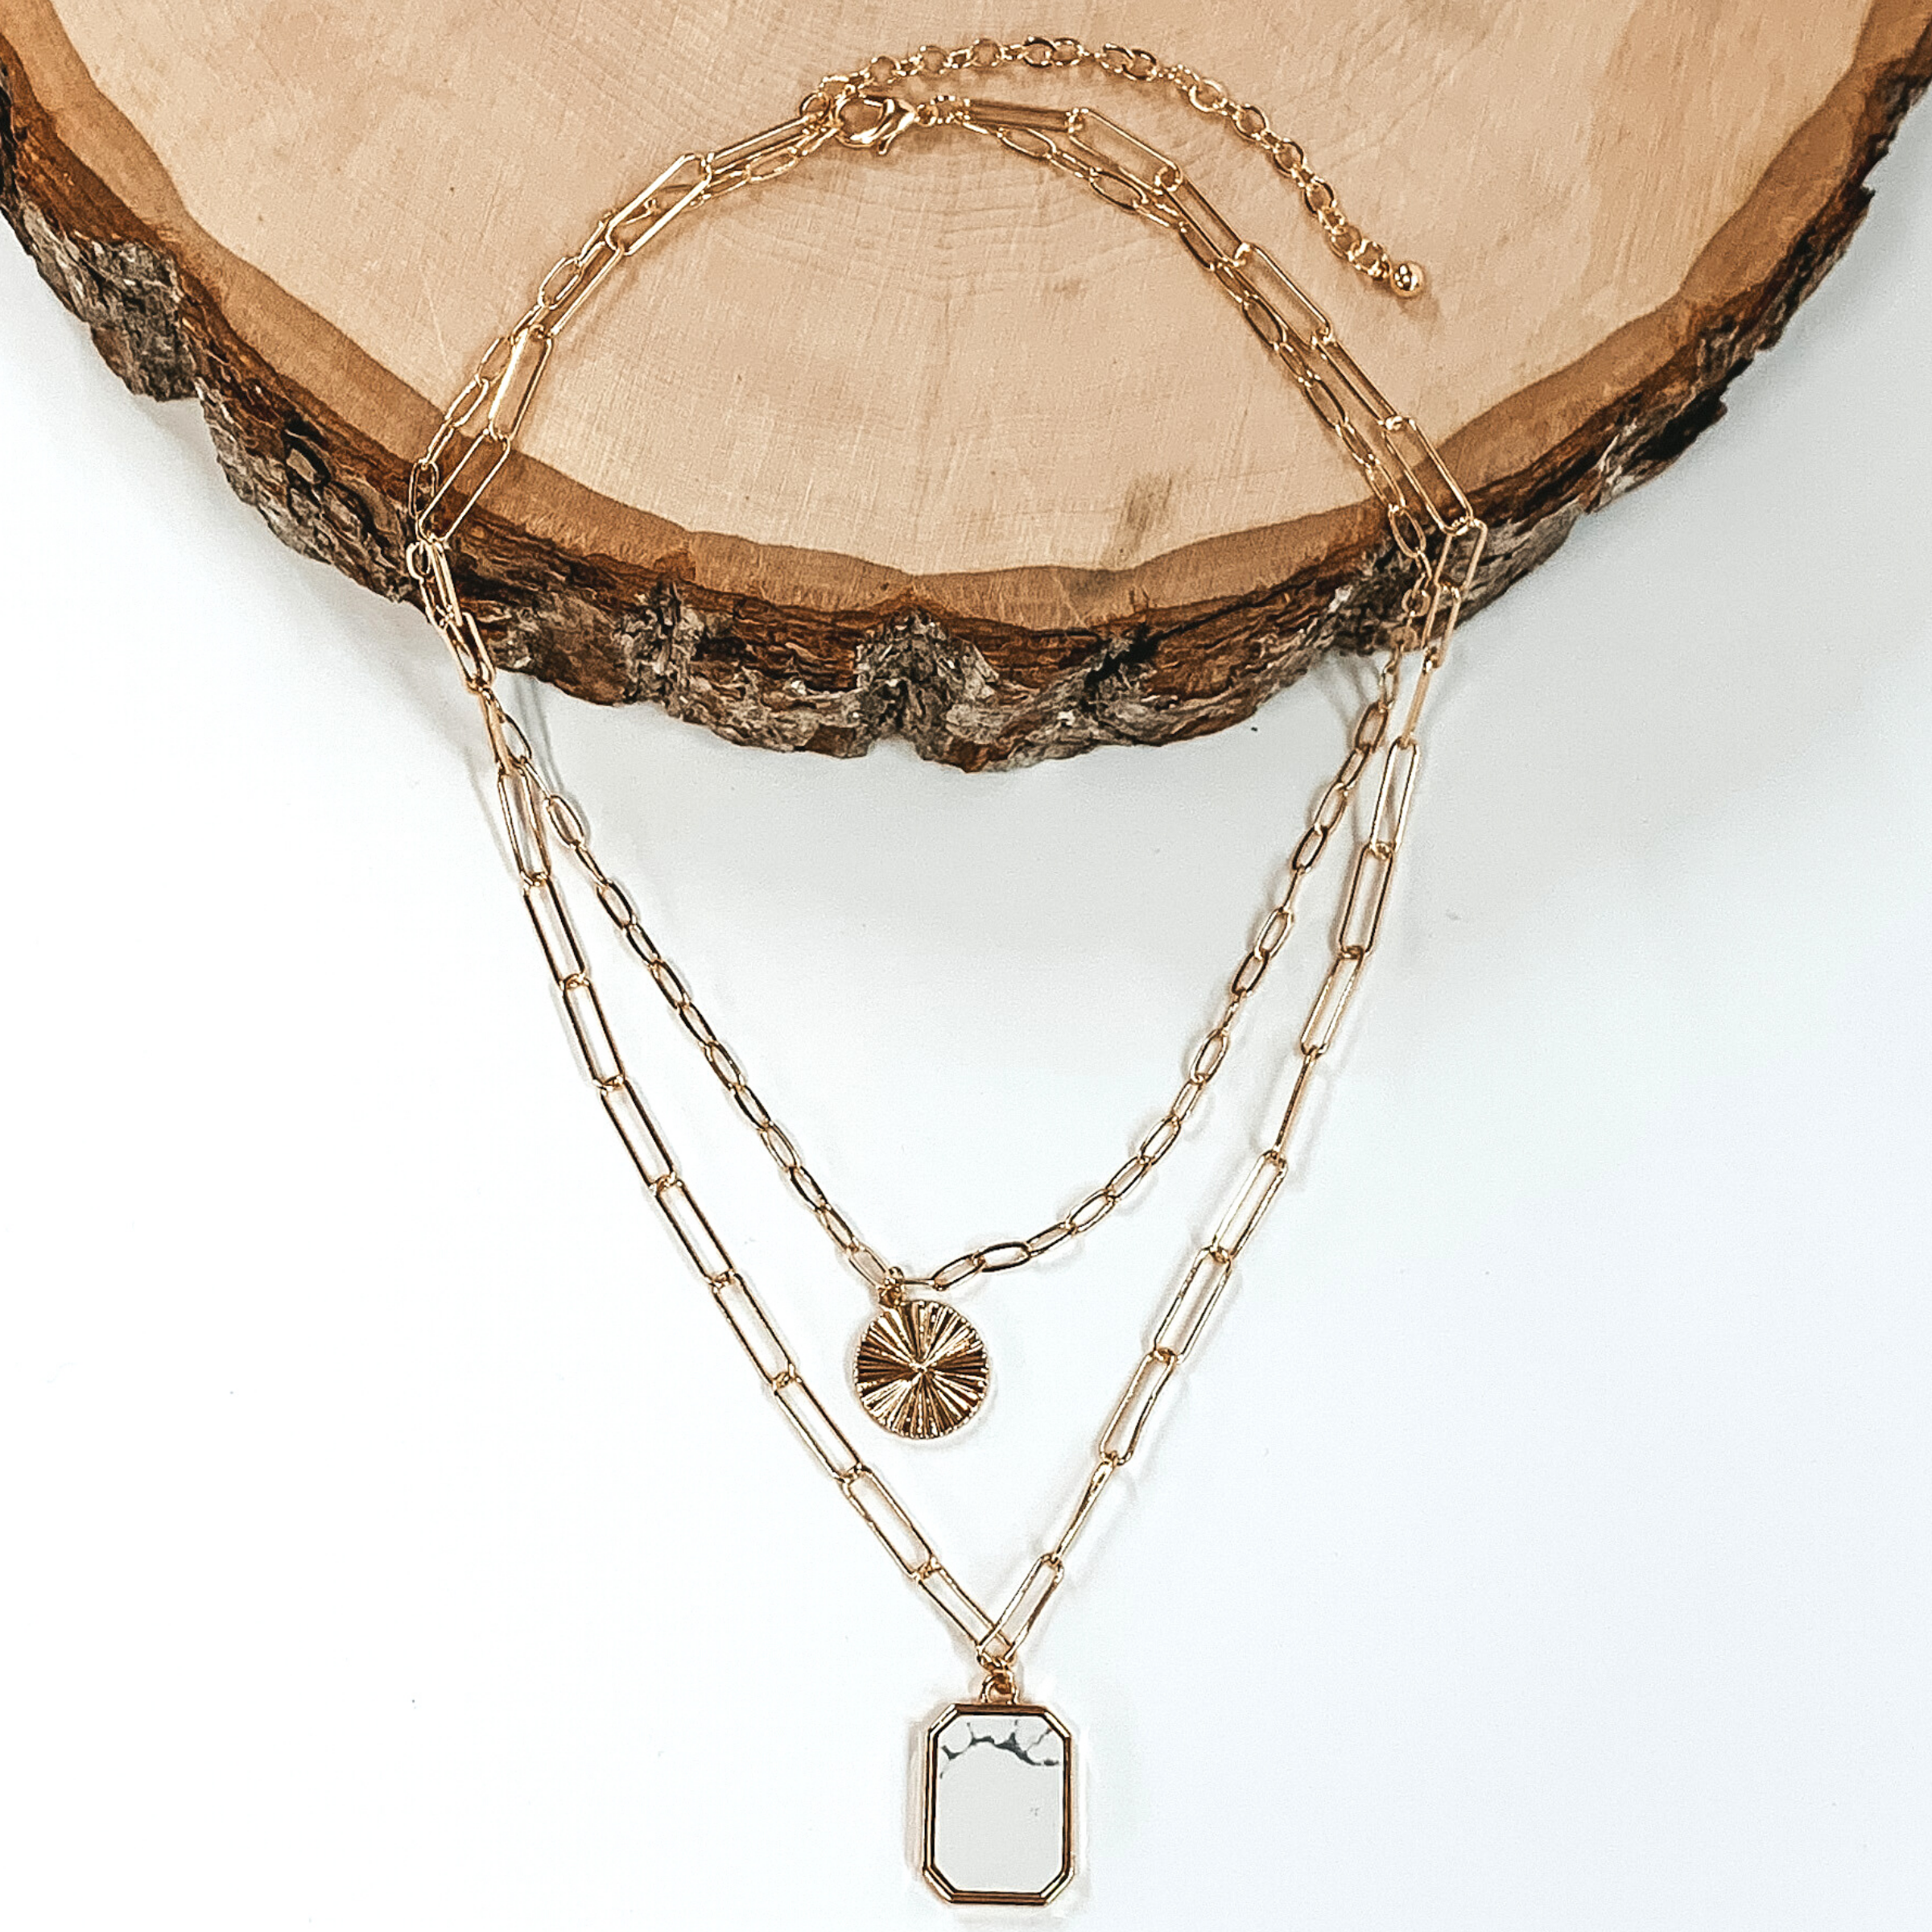 Double layered paperclip chain necklace in gold. The shorter strand has a gold circle pendant and the longer strand has a white stone pendant in a long octagon shape. This necklace is half laying on a piece of wood and is pictured on a white background.